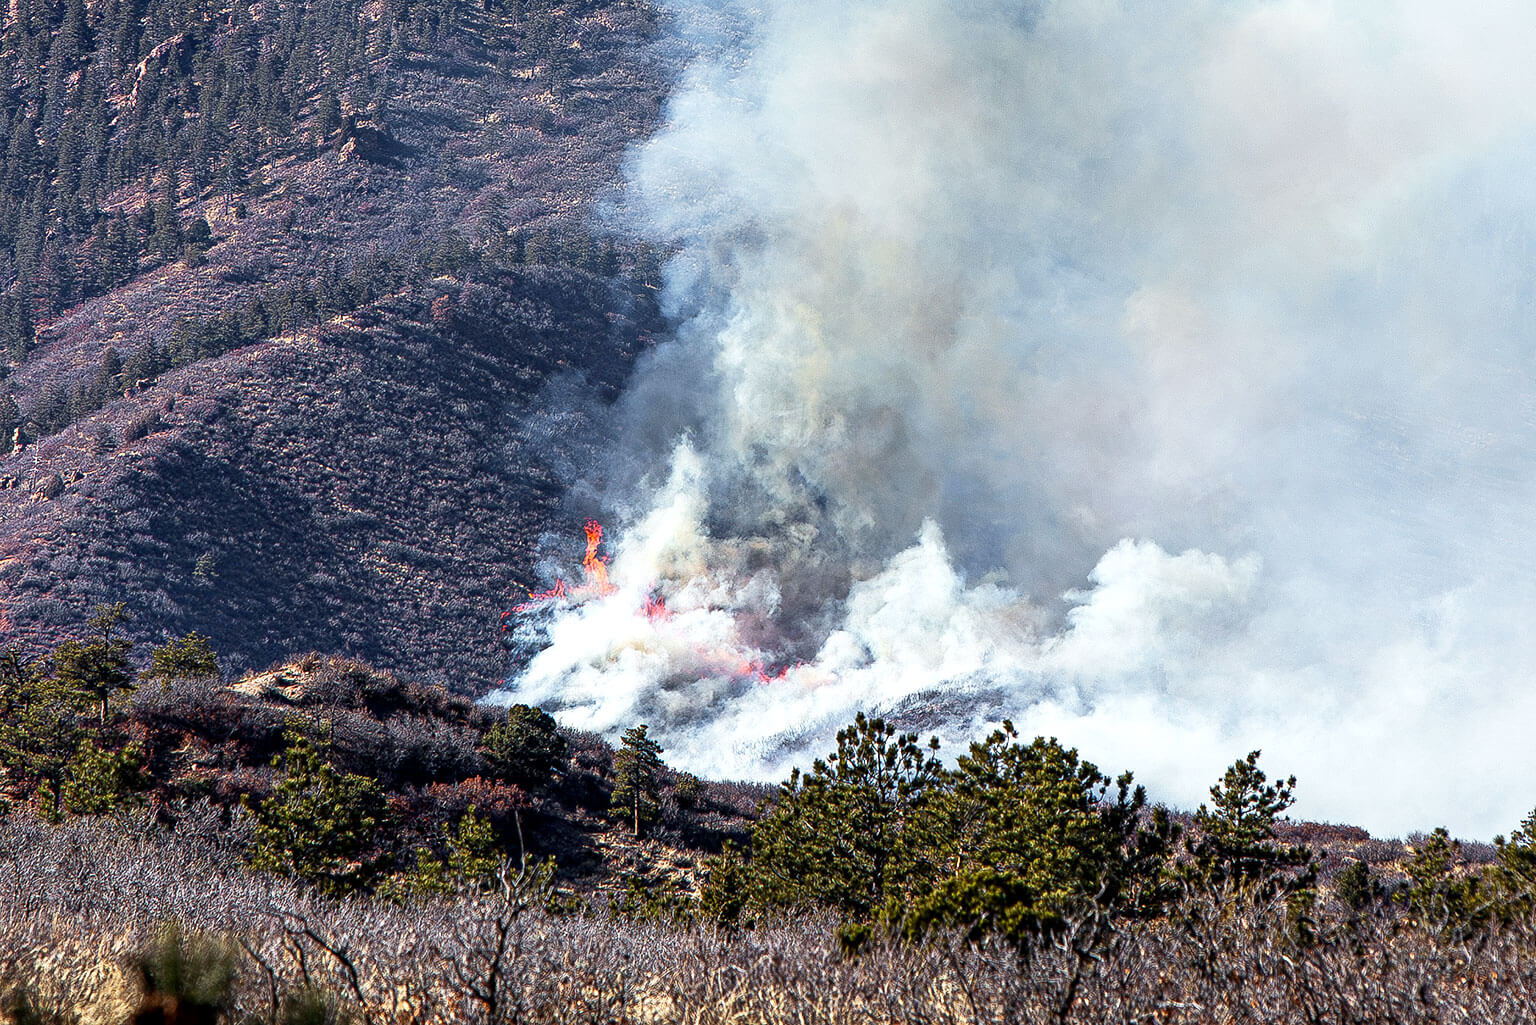 The West Monument Creek Fire started on the U.S. Air Force Academy Sunday, Feb. 25 and continues to burn Monday.